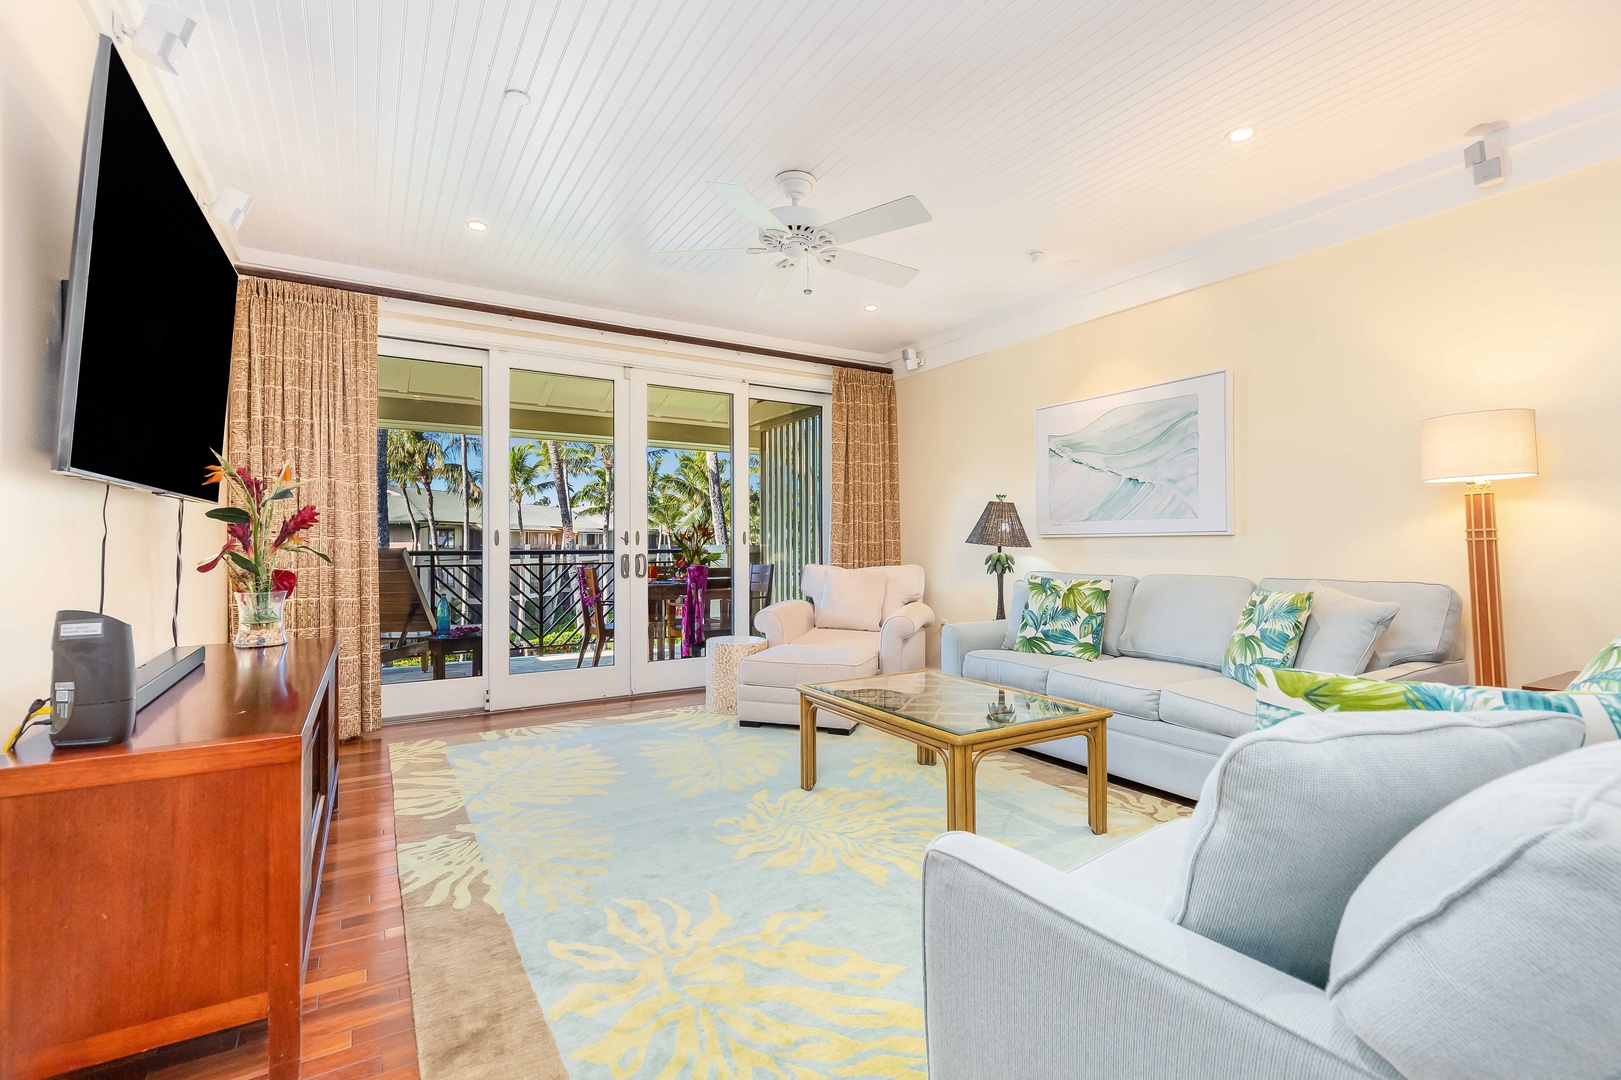 Kahuku Vacation Rentals, Turtle Bay Villas 313 - Living room with access to private patio